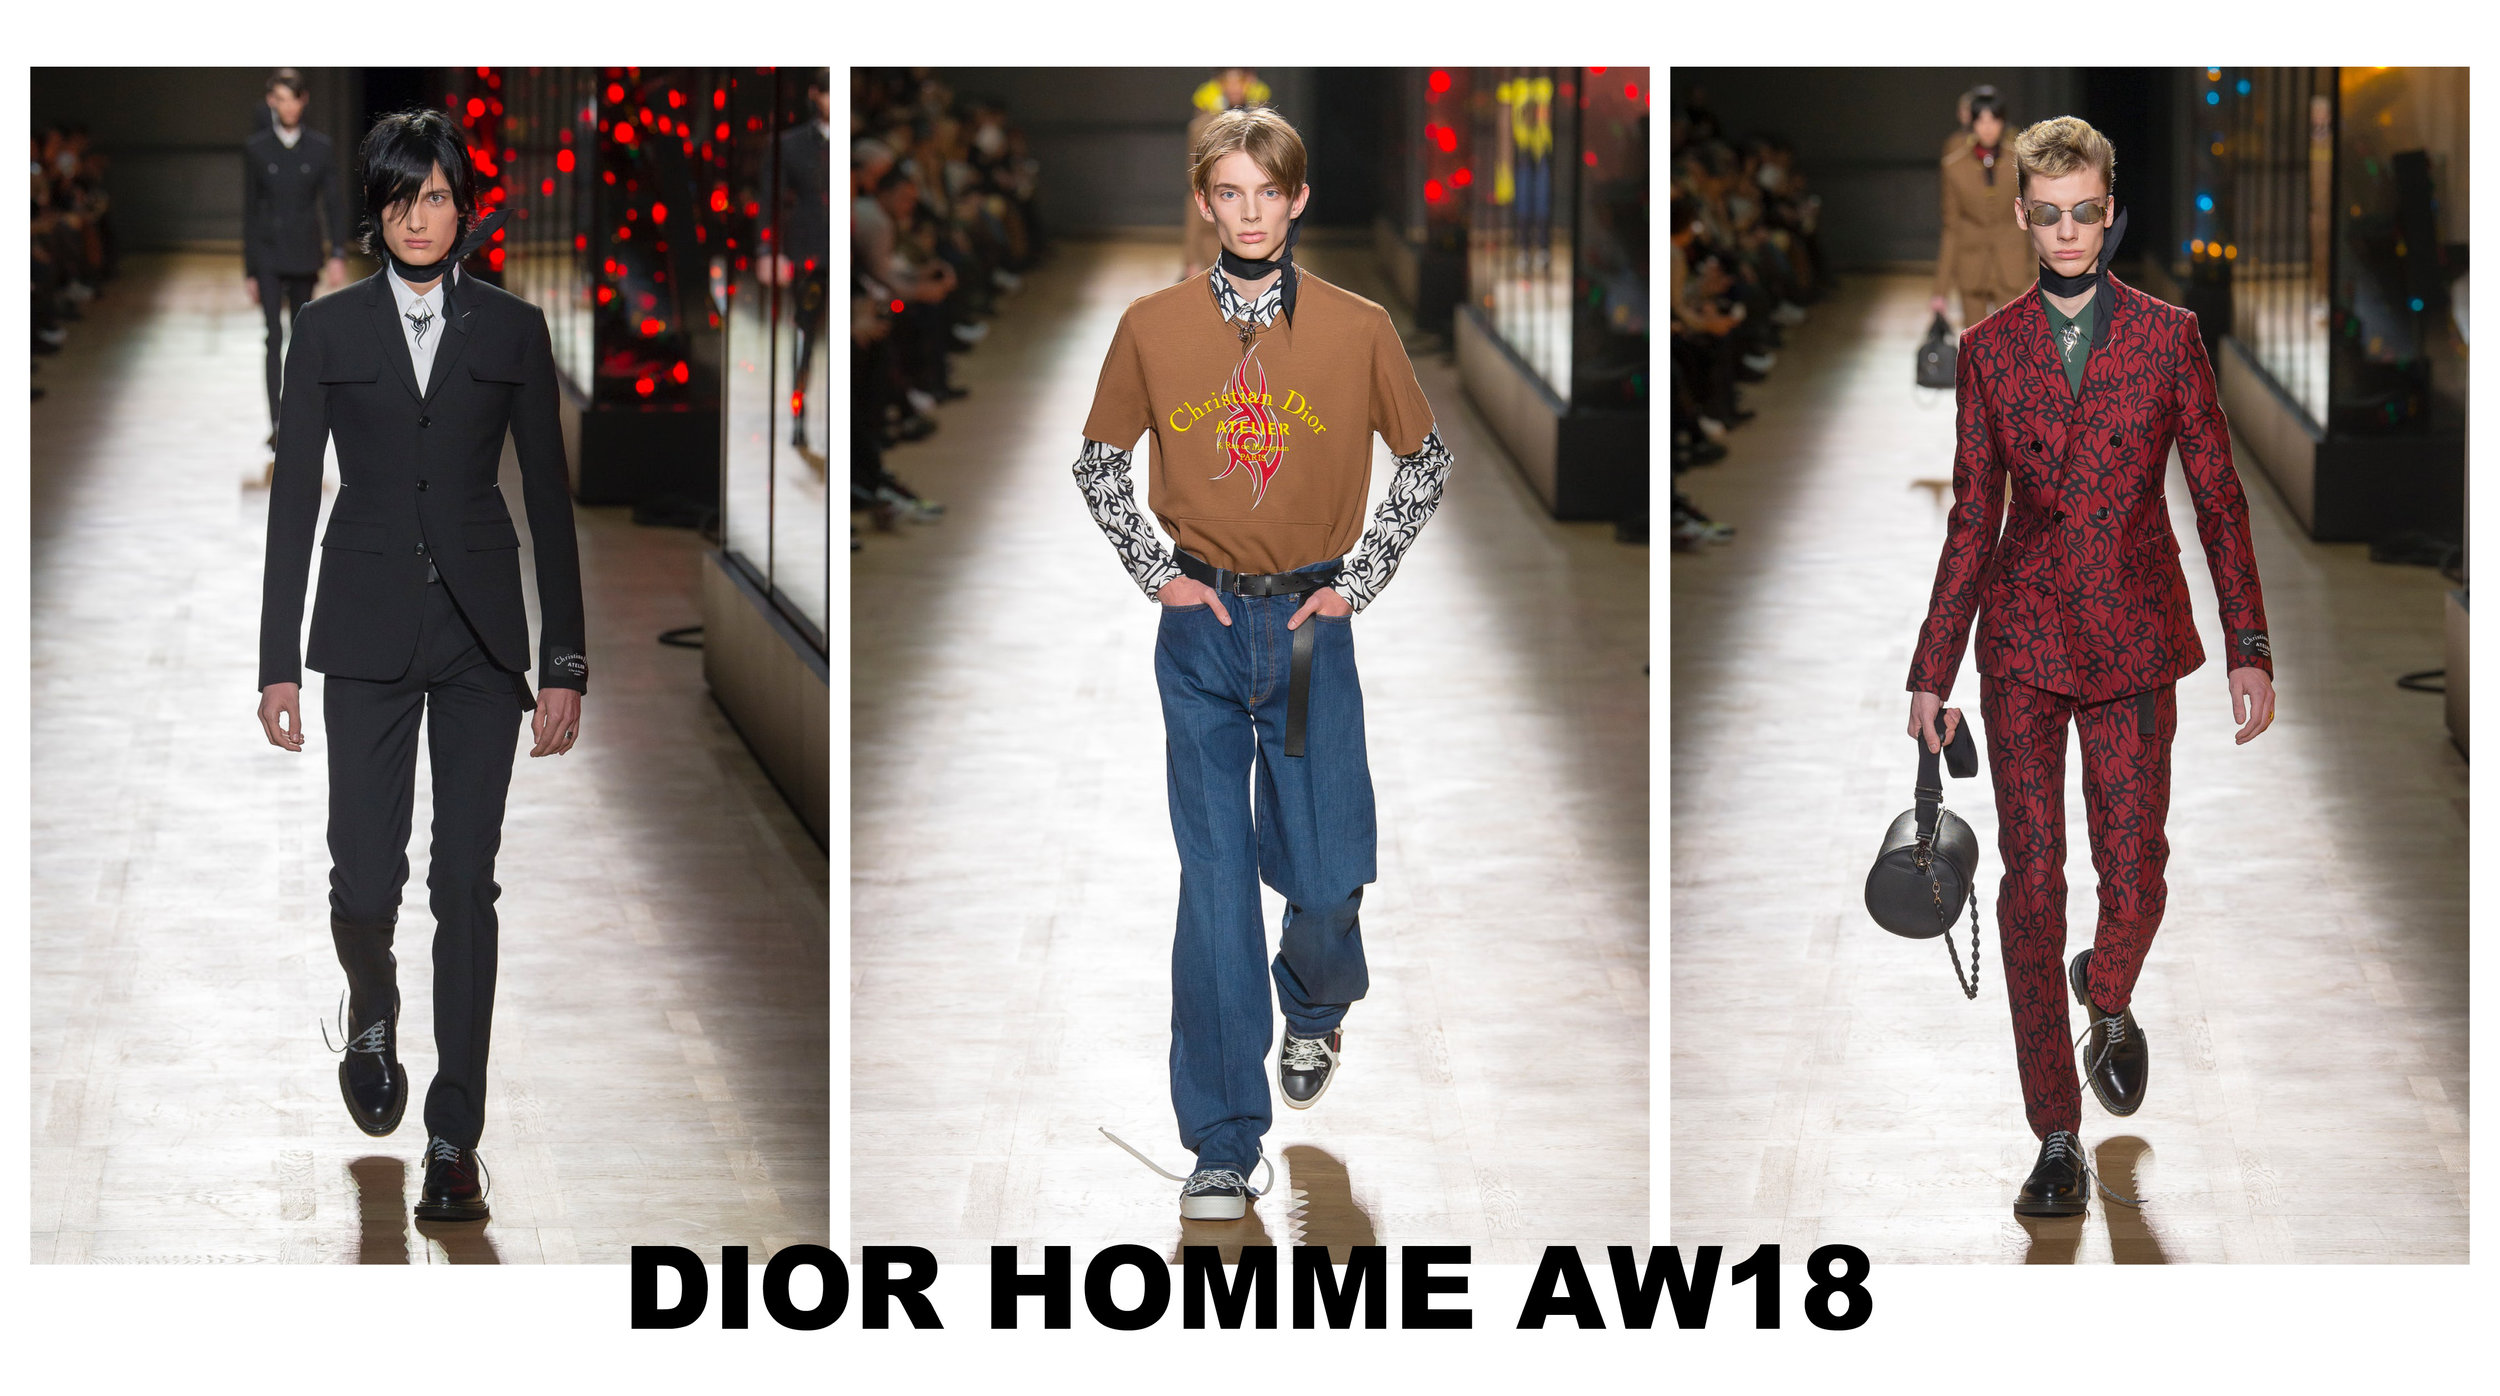 dior homme aw18